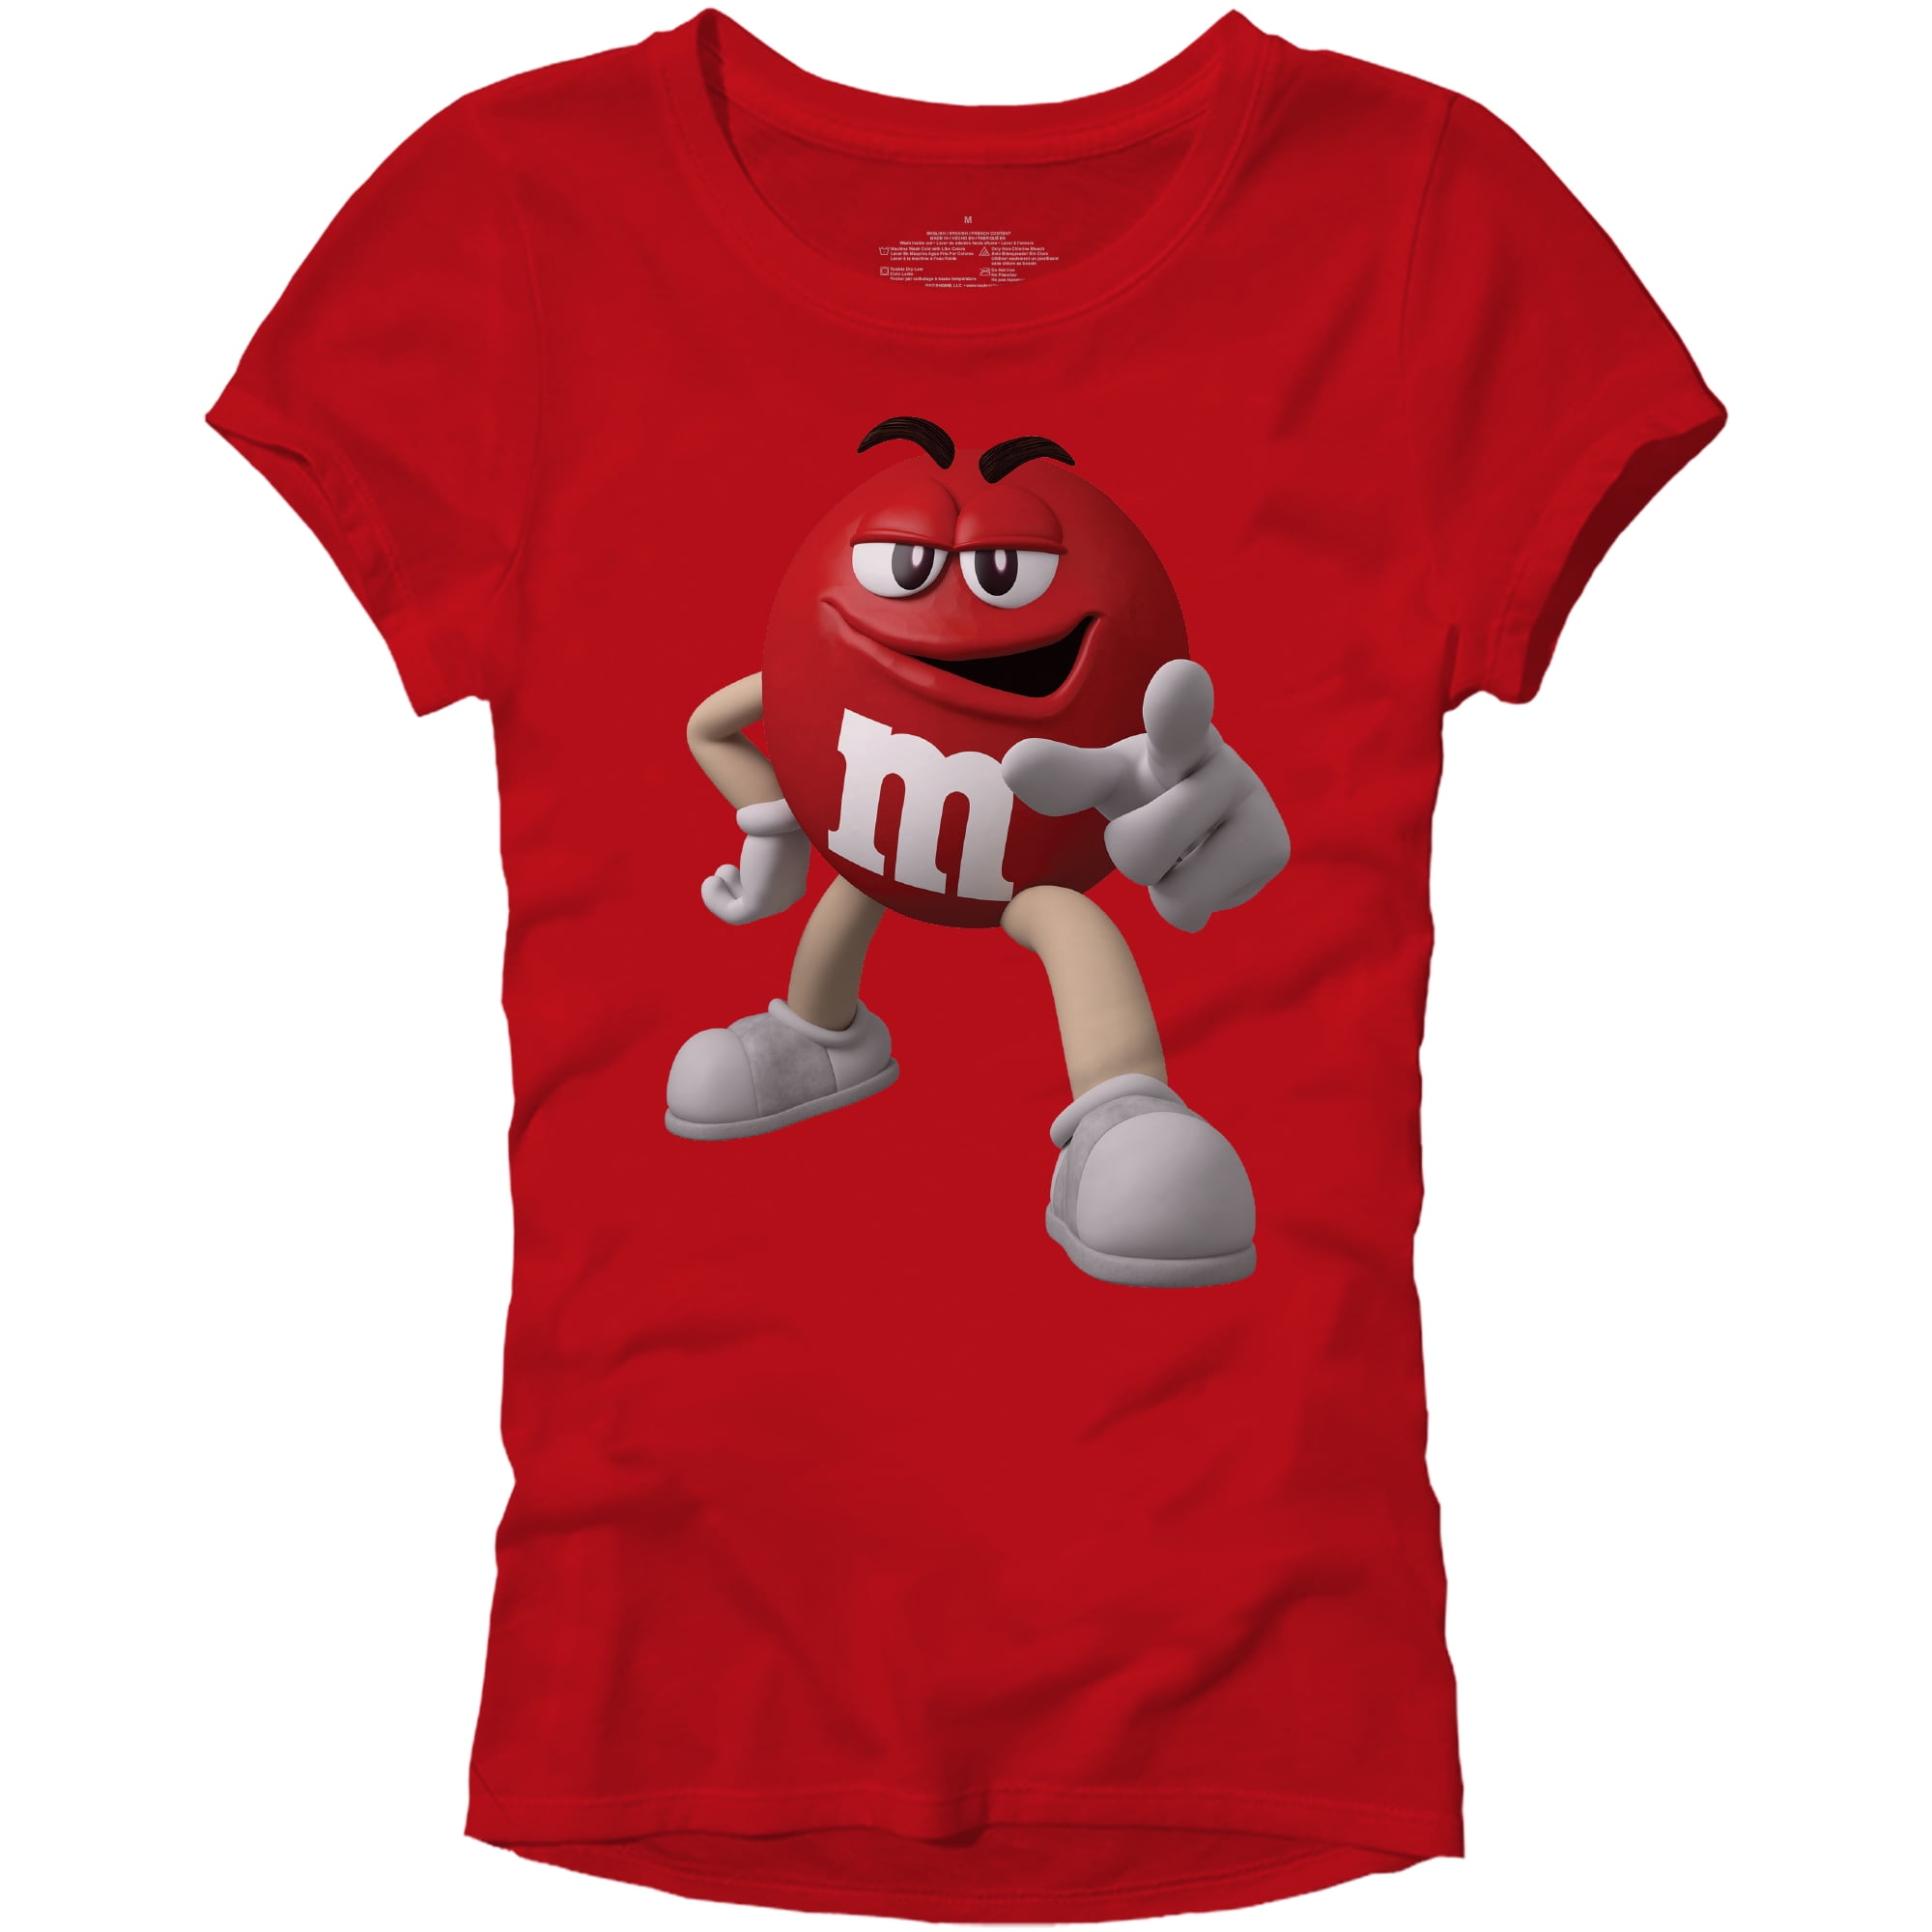 2011 Red! M&M Candy Snack Red Character T-Shirt Size Medium